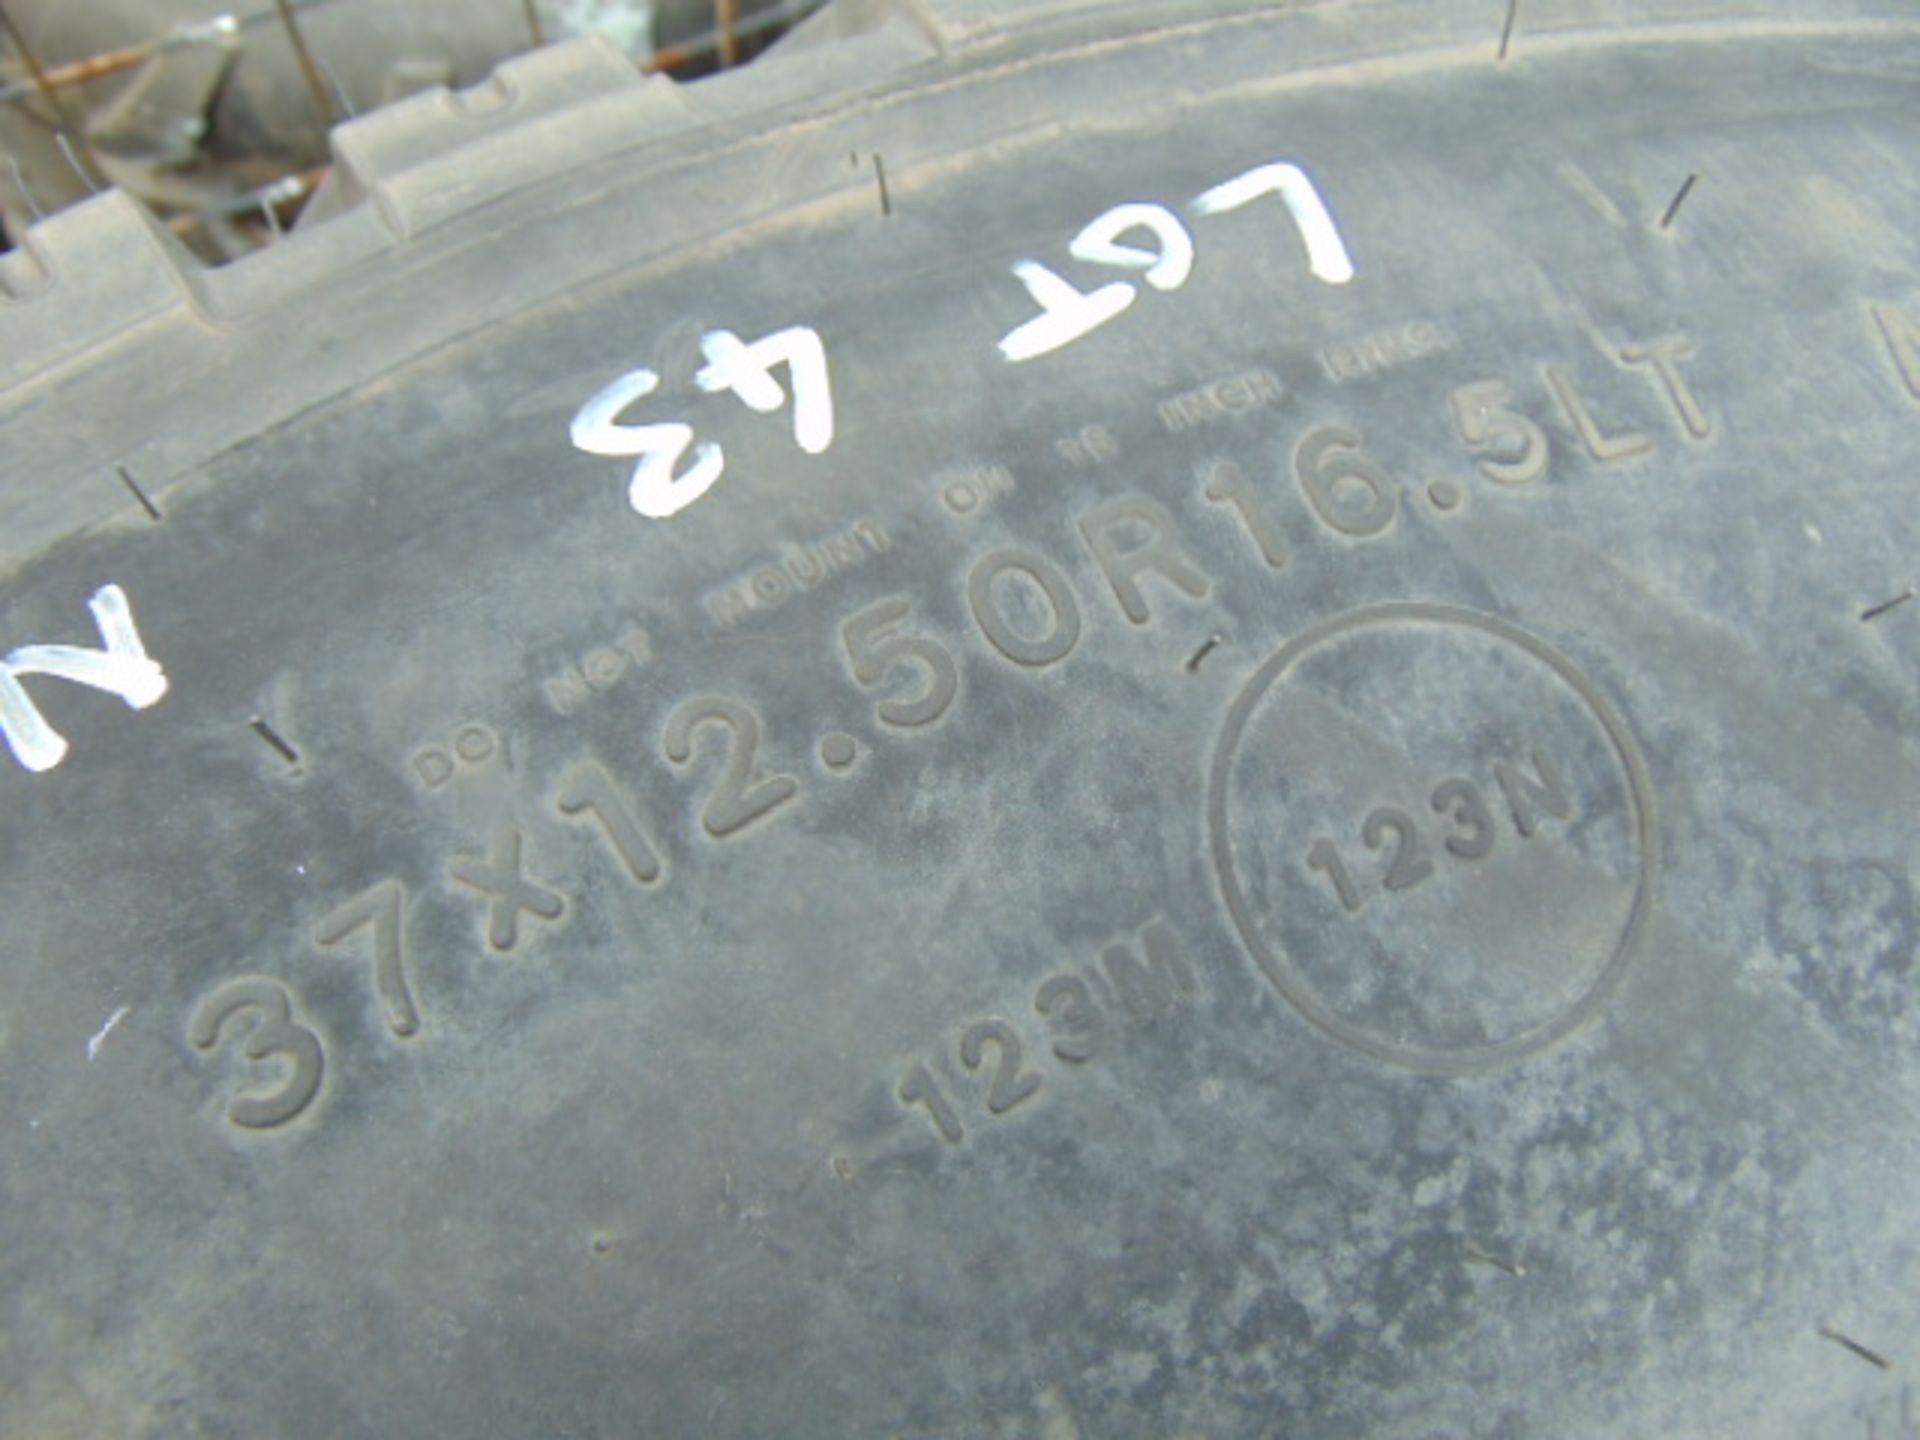 3 x Goodyear Wrangler MT 37x12.50 R16.5LT Tyres with 8 Stud Rims - Image 6 of 6